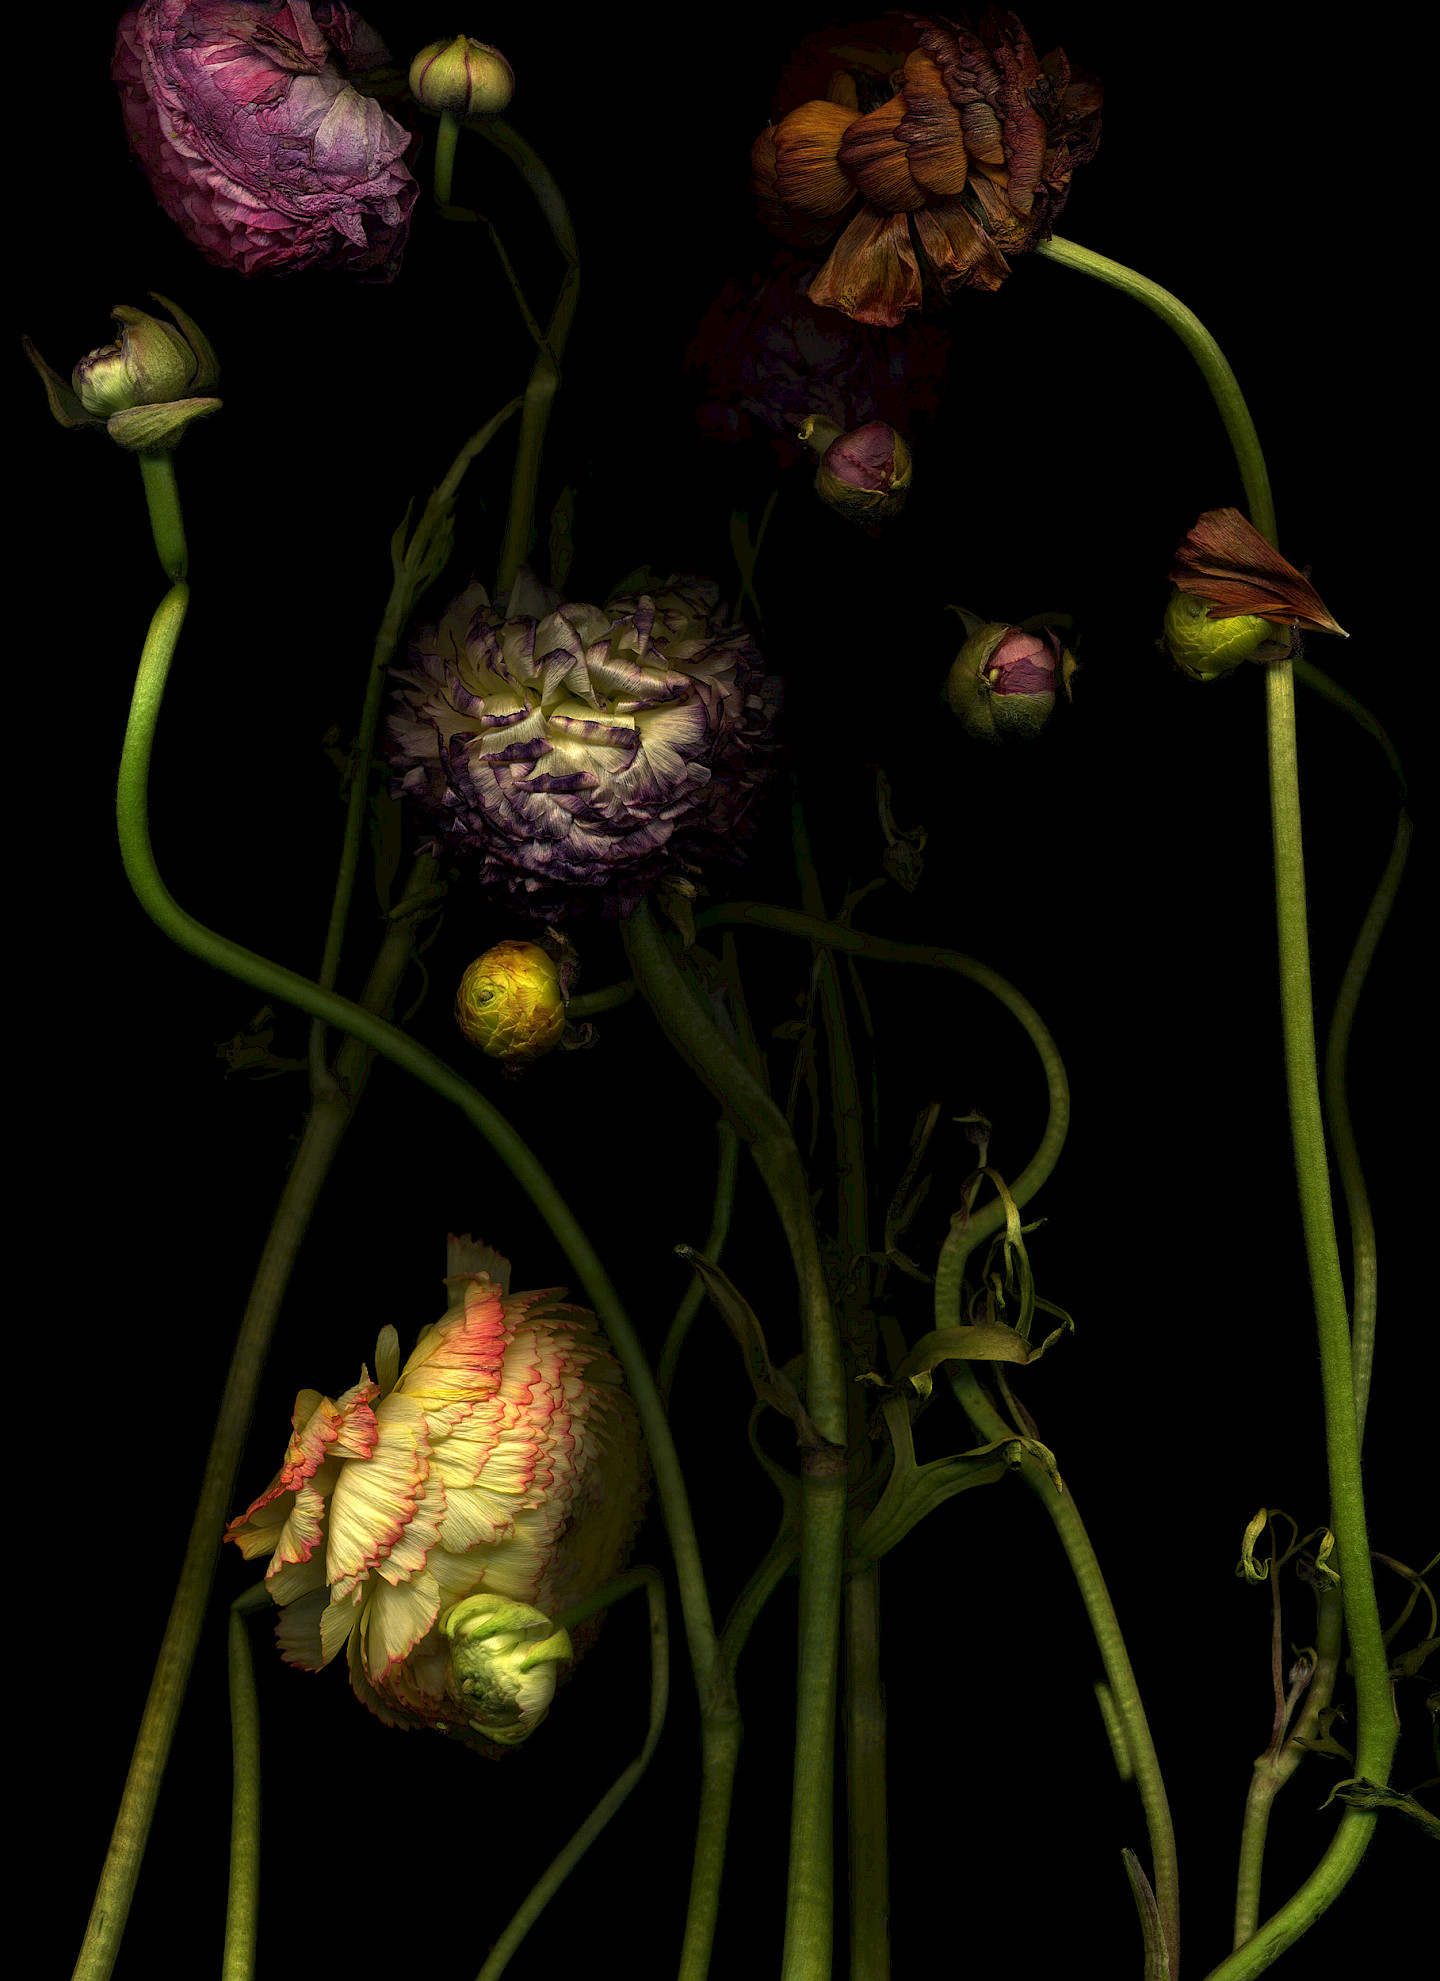 Michaela Bruckmüller: Ranunculus | Danse macabre from the series On becoming and passing away, photograph, 2017